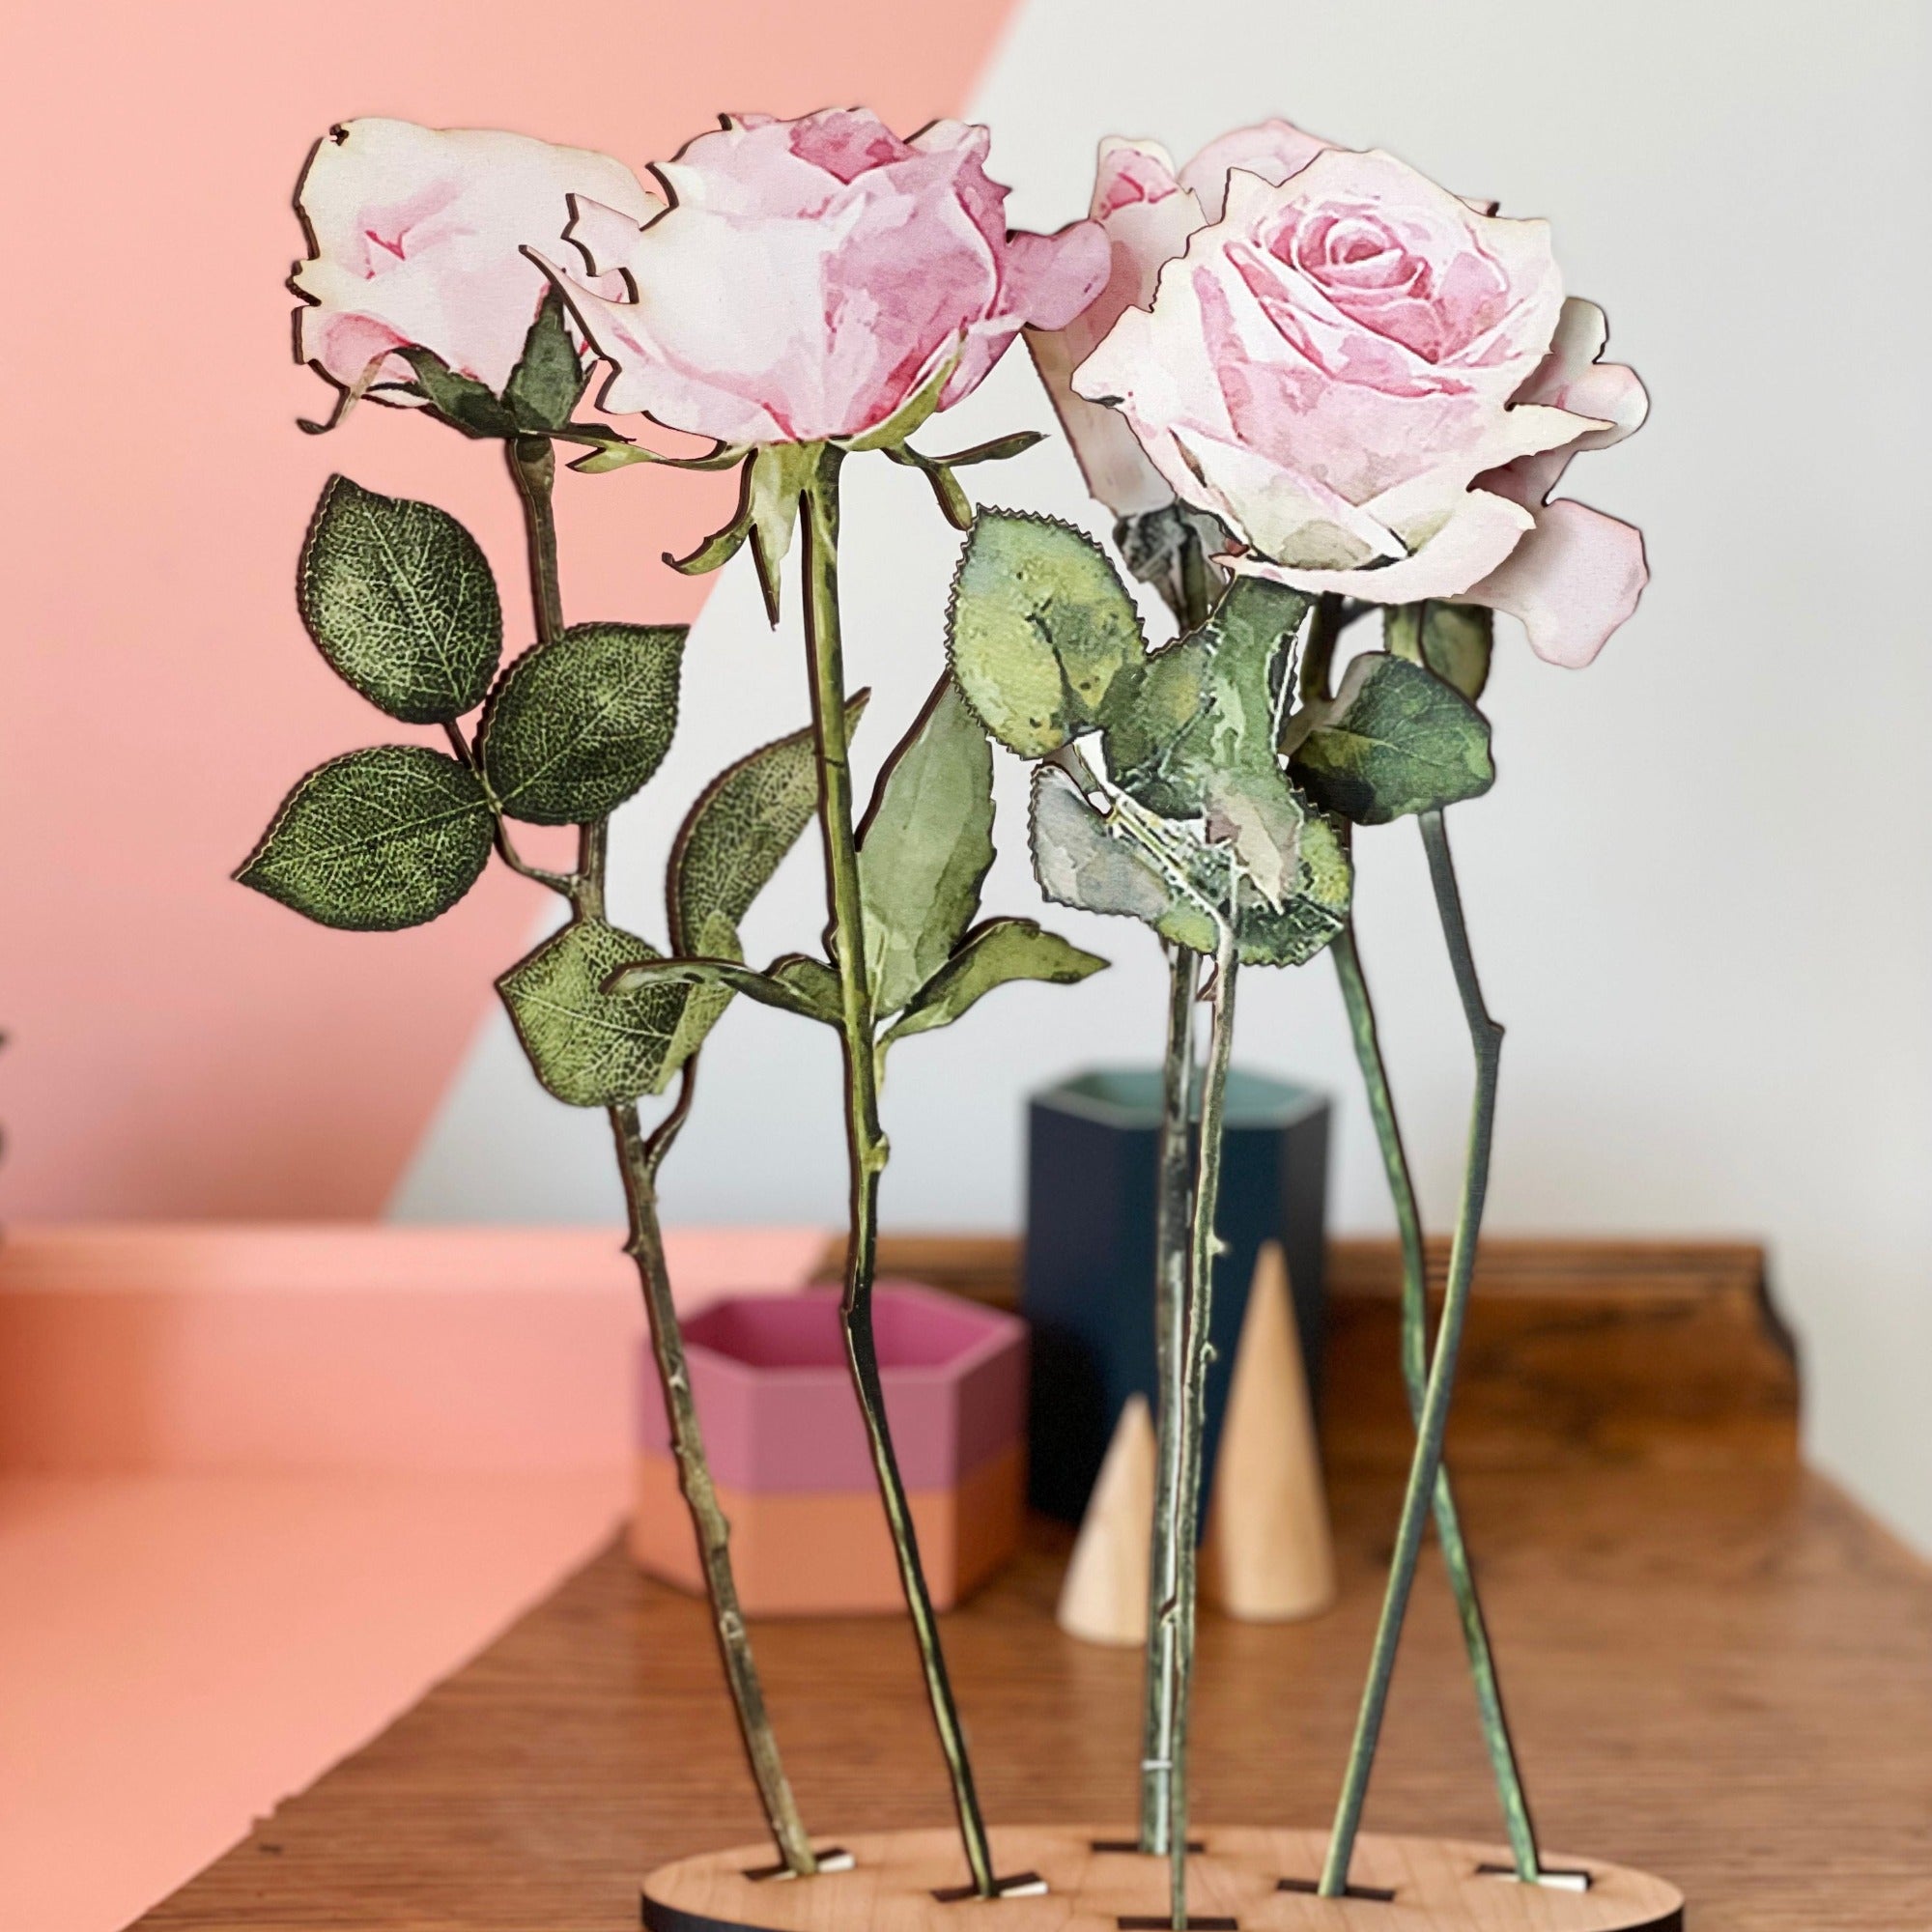 Bouquet of wooden pale pink roses